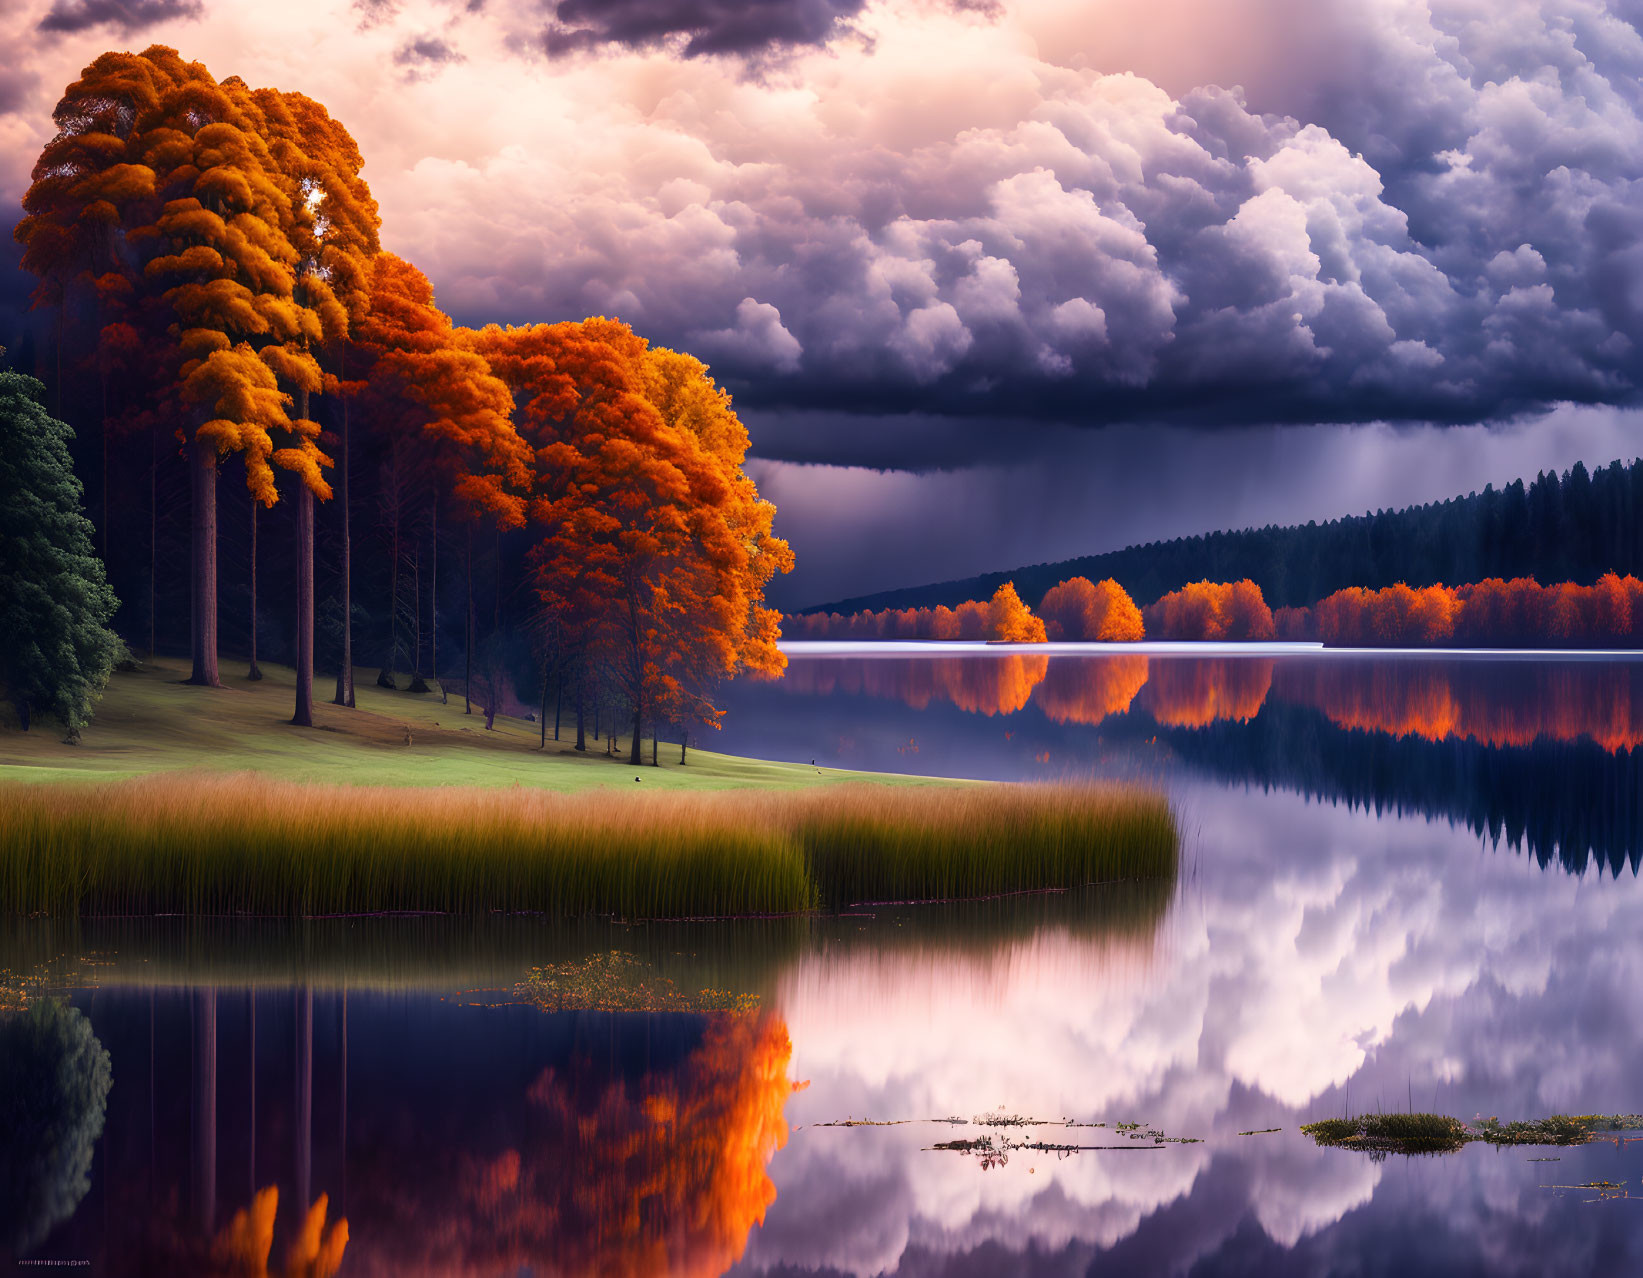 Tranquil lake with orange trees under dramatic sky